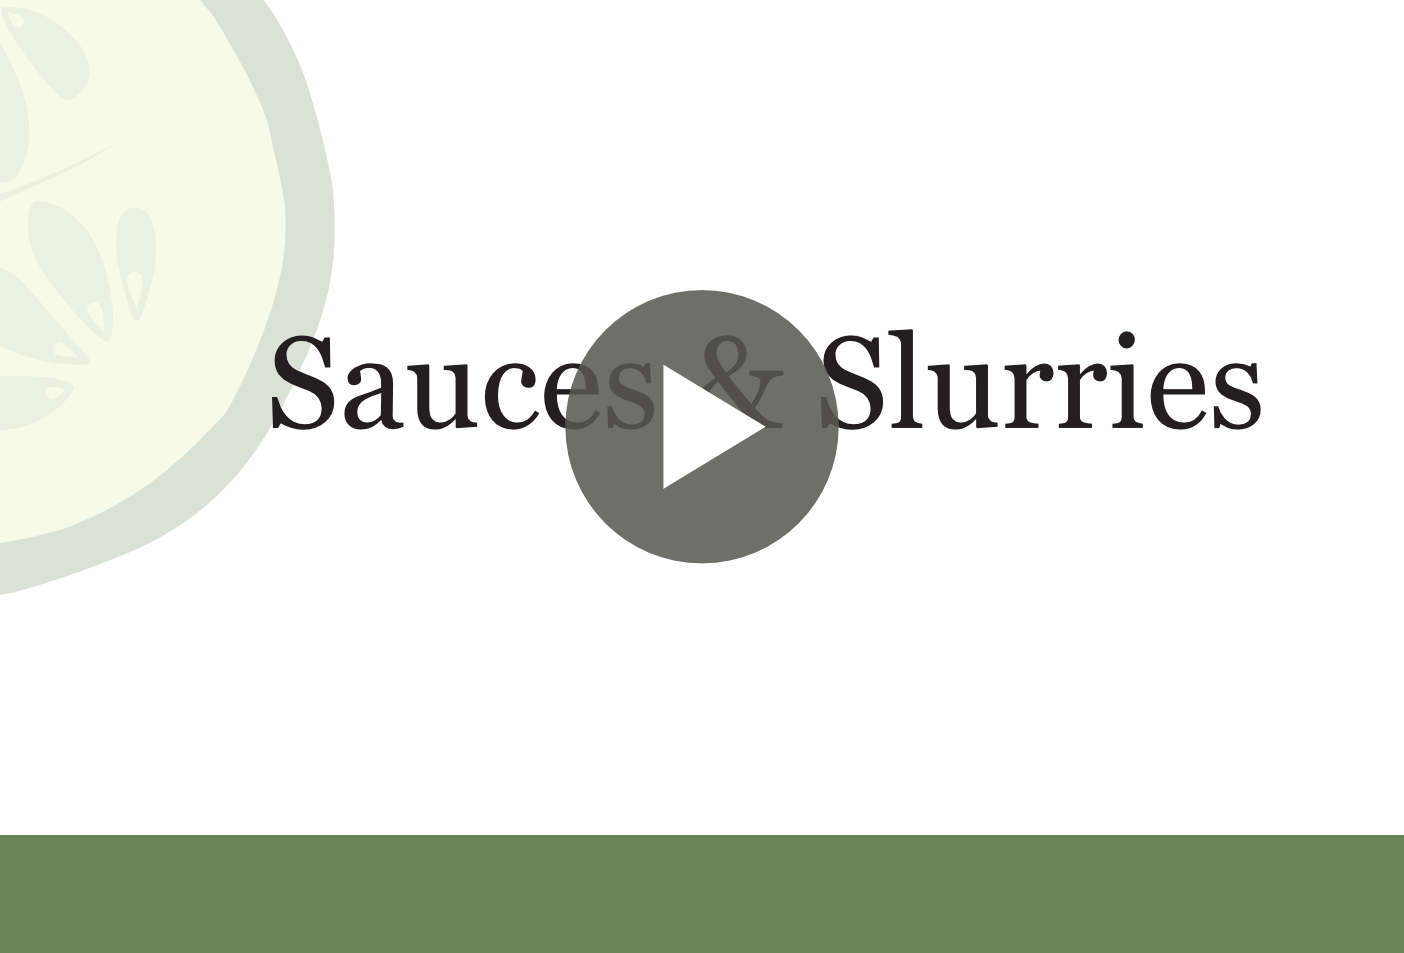 How to make a slurry video cover